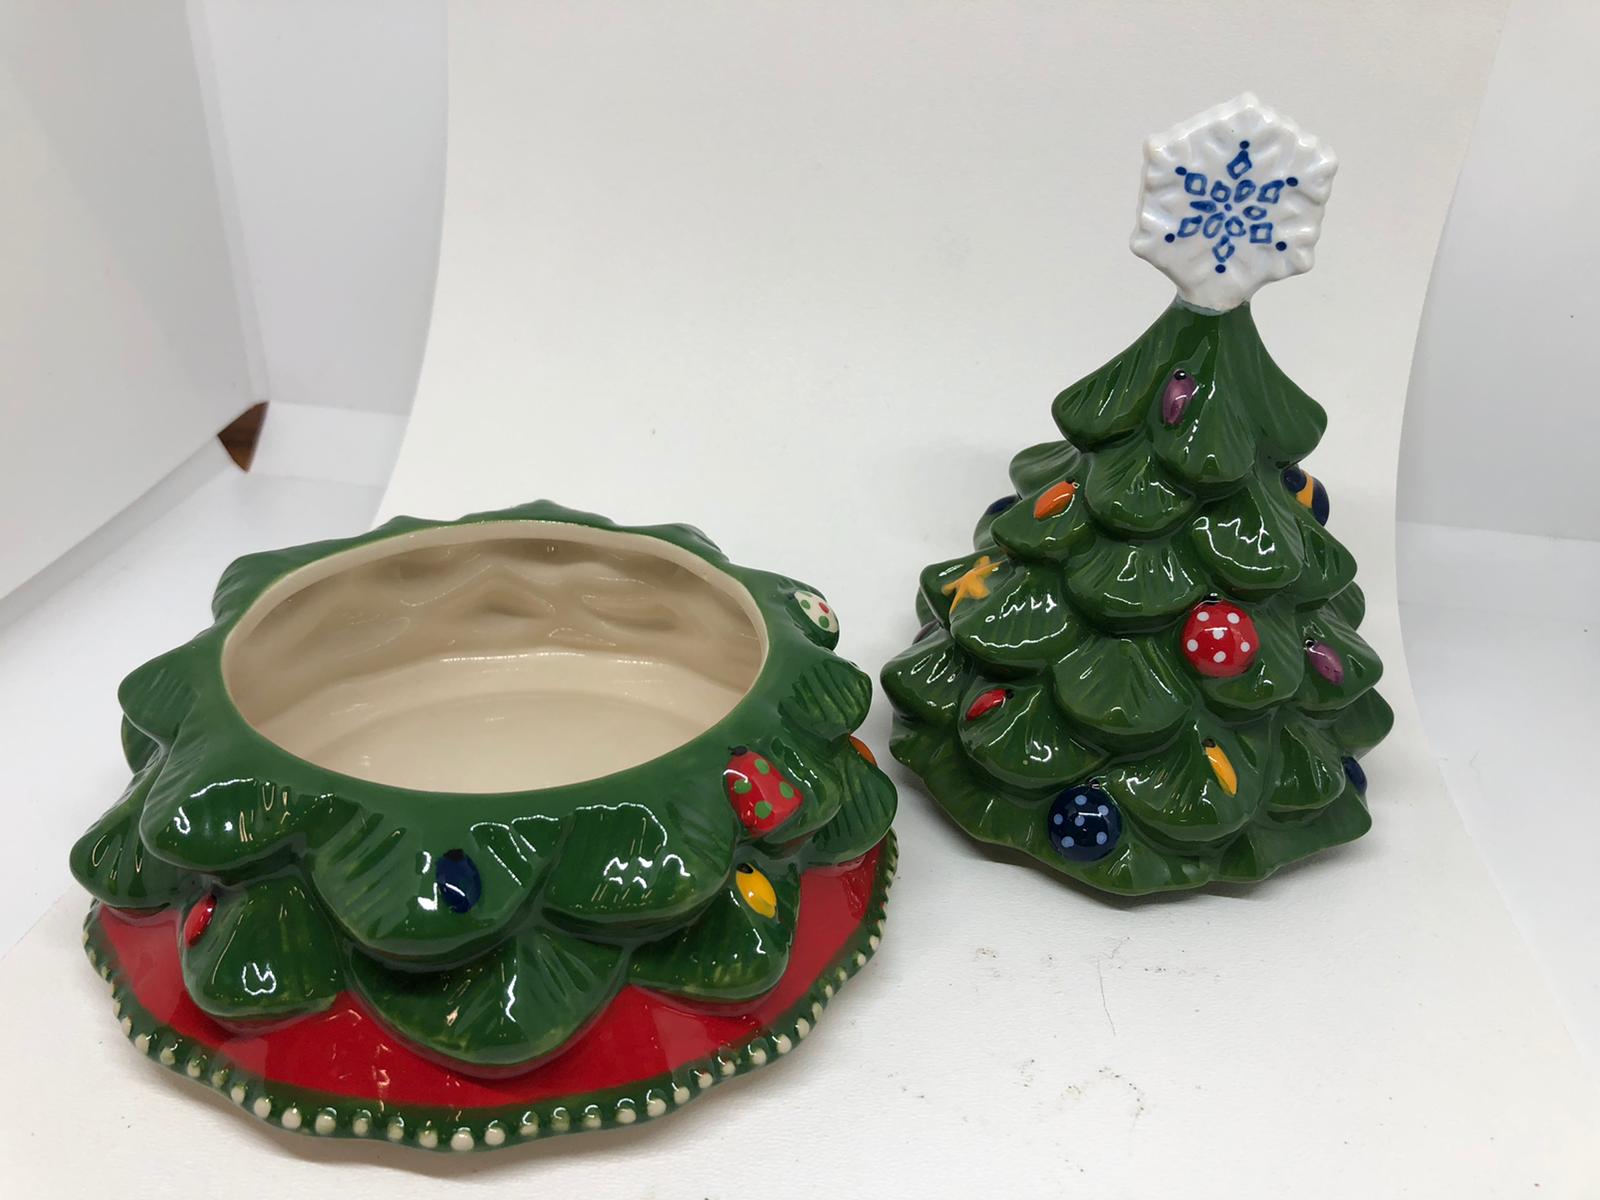 "As is" Temp-tations Special Edition Holiday Chip and Dip Platter